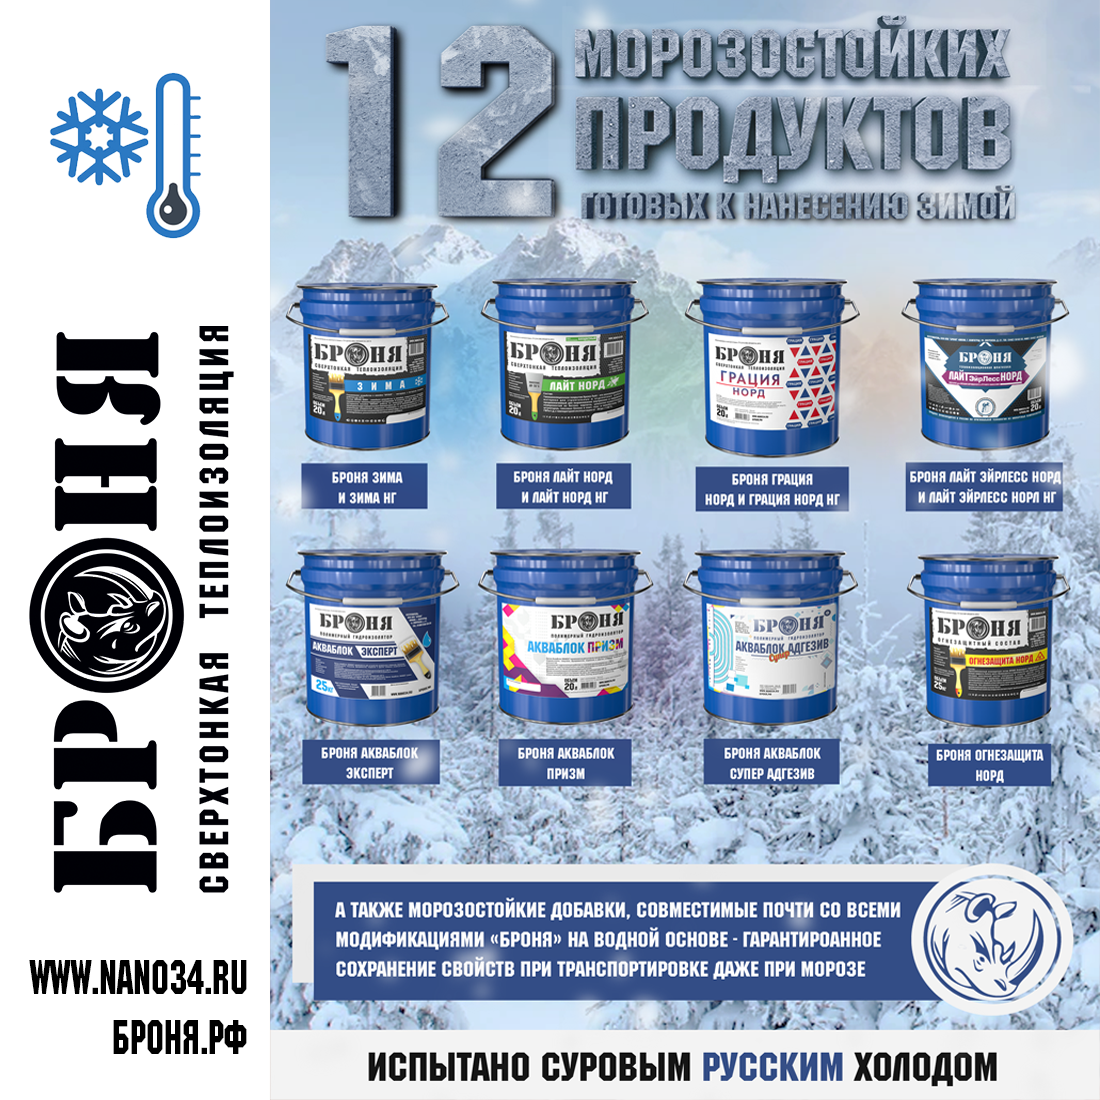 12 frost-resistant products "BRONYA", ready for application in winter and frost additives. Tested by the harsh Russian cold.